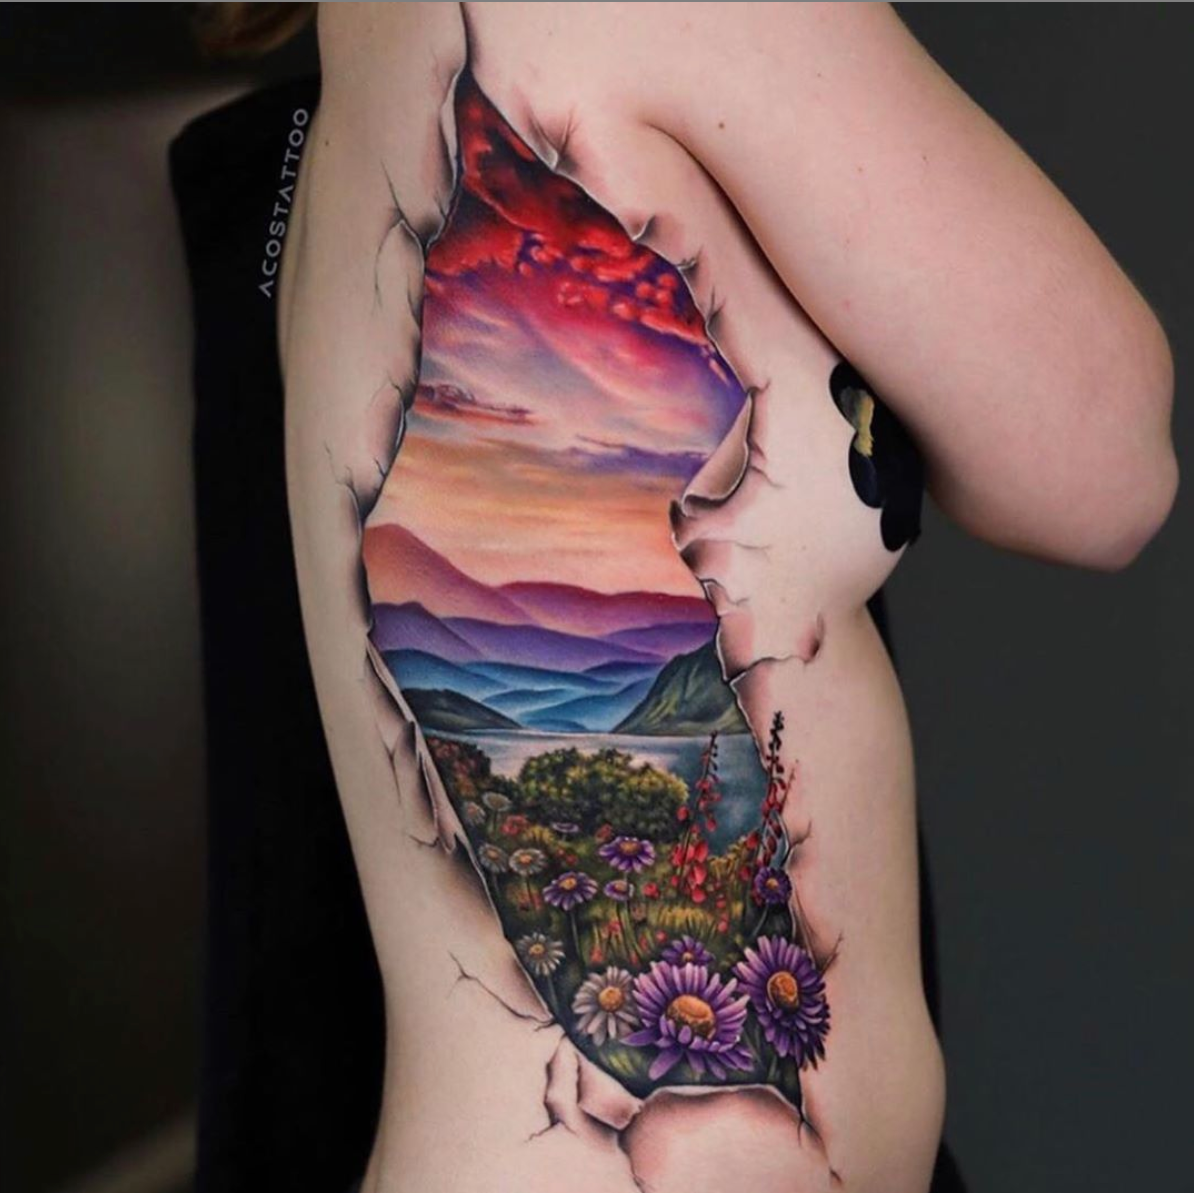 39+ Amazing and Best Arm Tattoo Design Ideas For 2019 - Page 18 of 39 -  Womensays.com Women Blog | Arm tattoo, Chicano tattoos sleeve, Arm tattoos  for guys